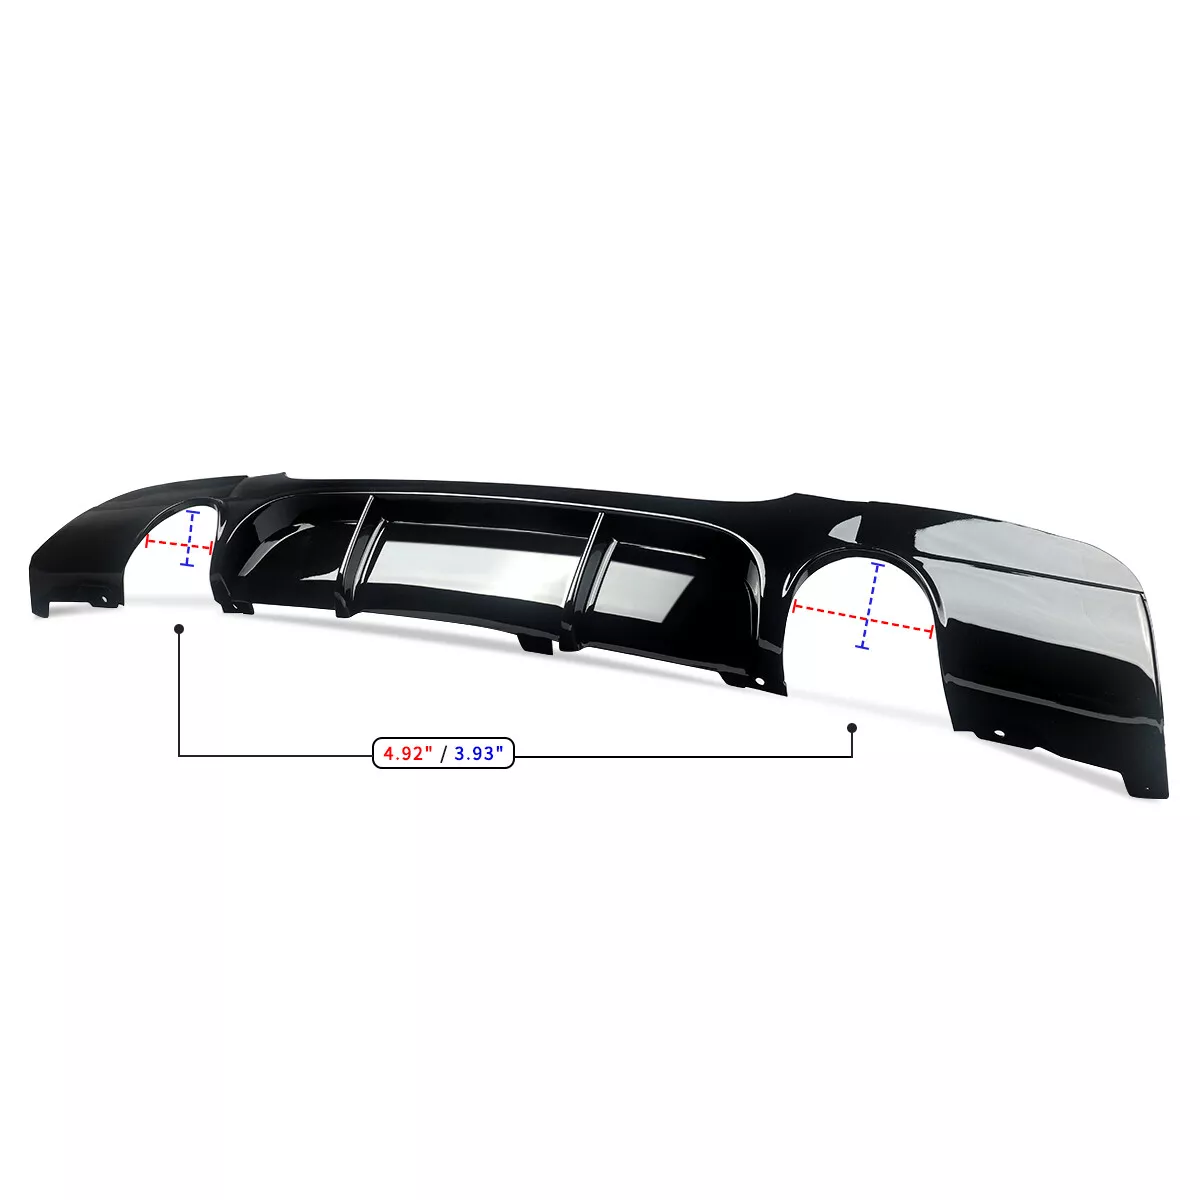 bmw_e91only on Instagram: Rear diffuser for M Sport bumper For BMW E90 E91  2004-2012 Available to order www.bodykitonlinestore.pro * 🛠️ Parts made of  fiberglass and Carbon fiber ⠀ 🛒 Want to purchase